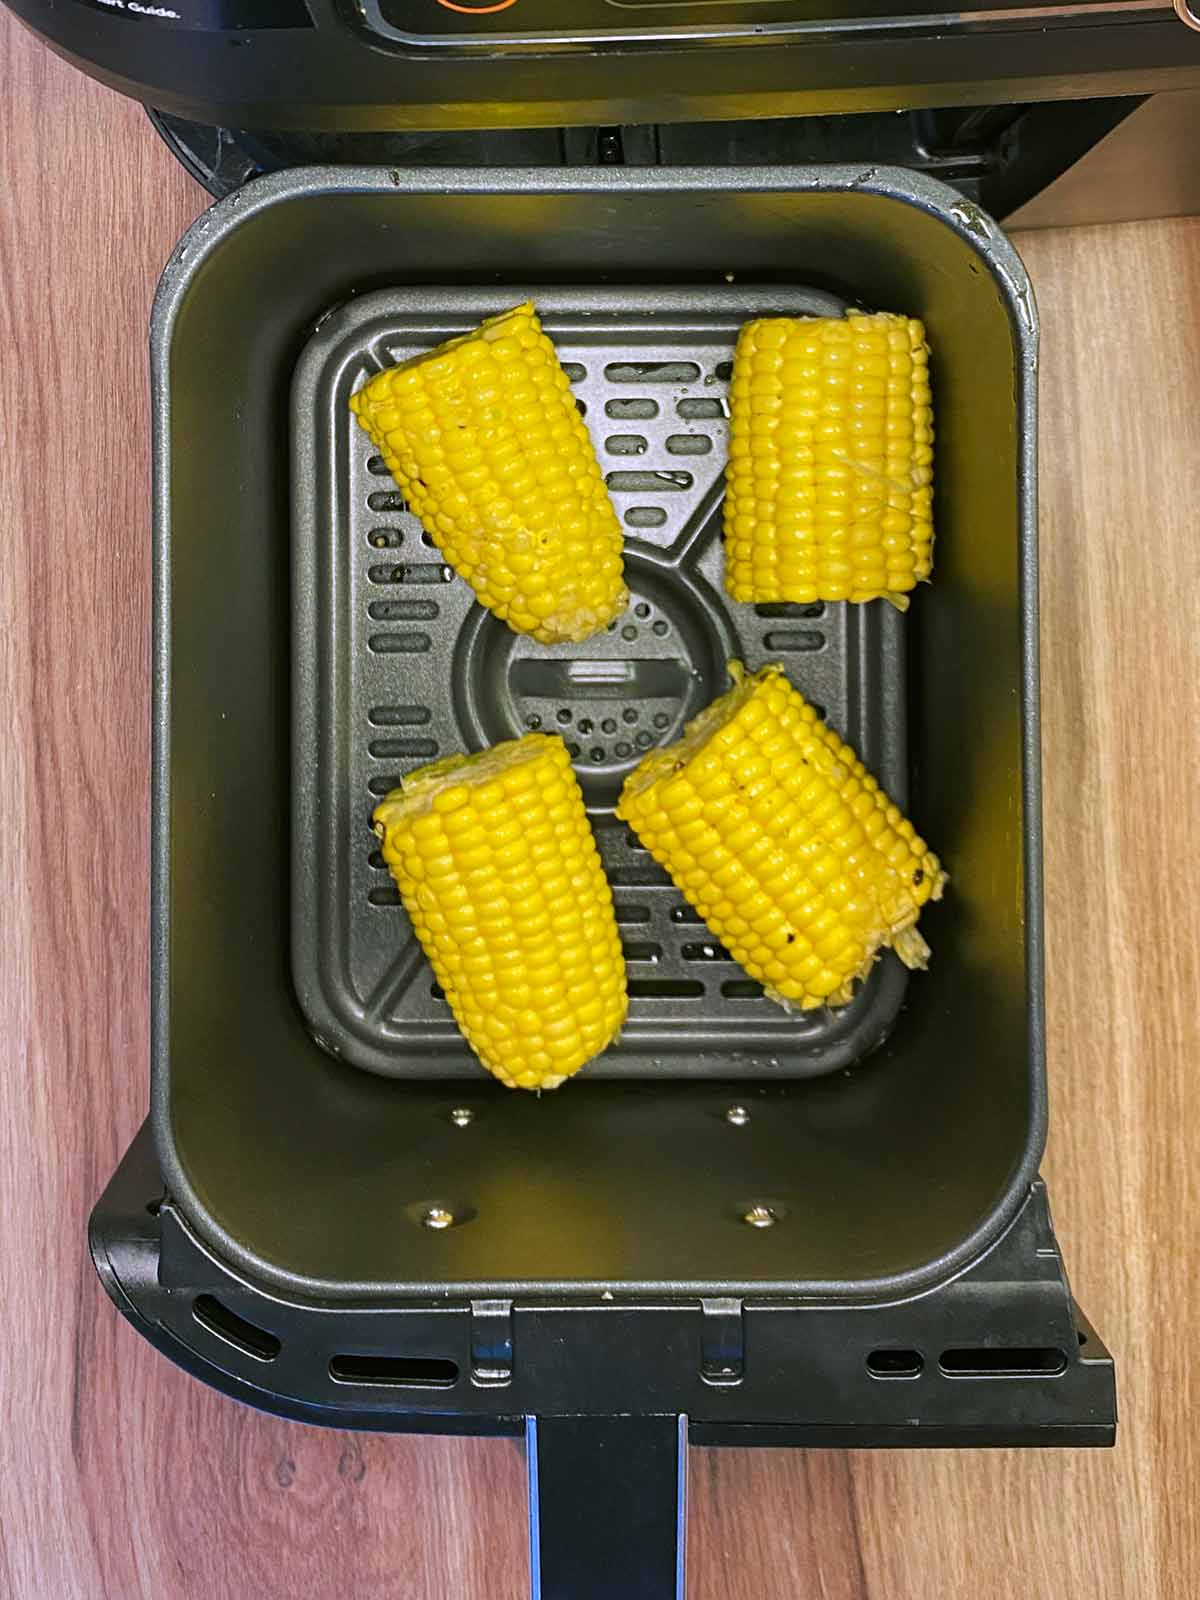 Four uncooked corn cobs in an air fryer basket.